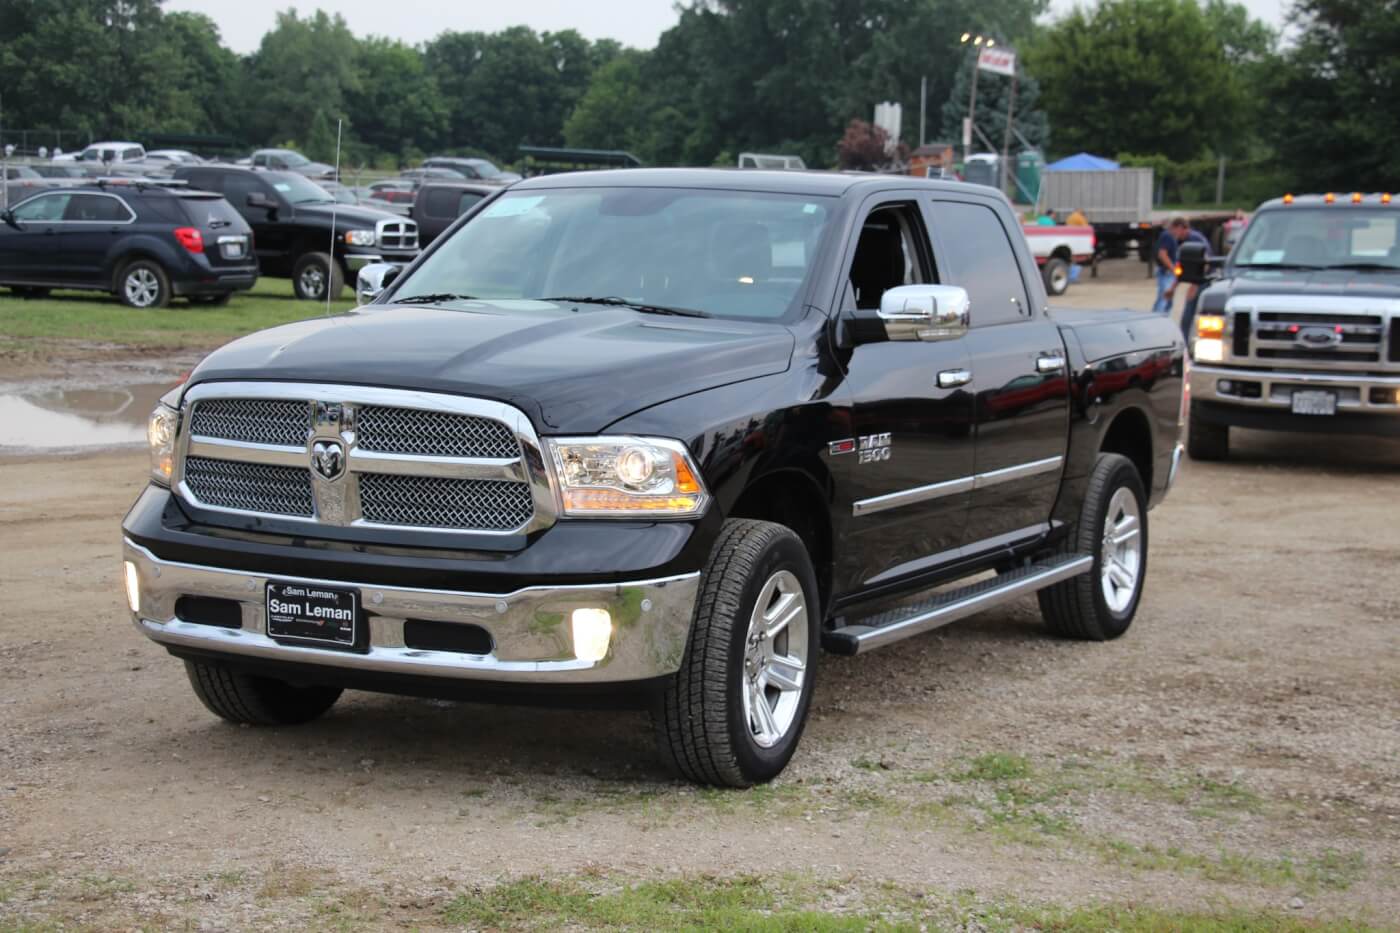 The best part about holding a stock turbo diesel truck class is the variety of vehicles that sign up. Joe Laverdiere entered his ’15 Dodge Ram 1500 Eco Diesel in the stock turbo class for a little fun. And even though he would place at the back of the pack, his 30-mpg pickup left under its own power…and made it into work the next day.